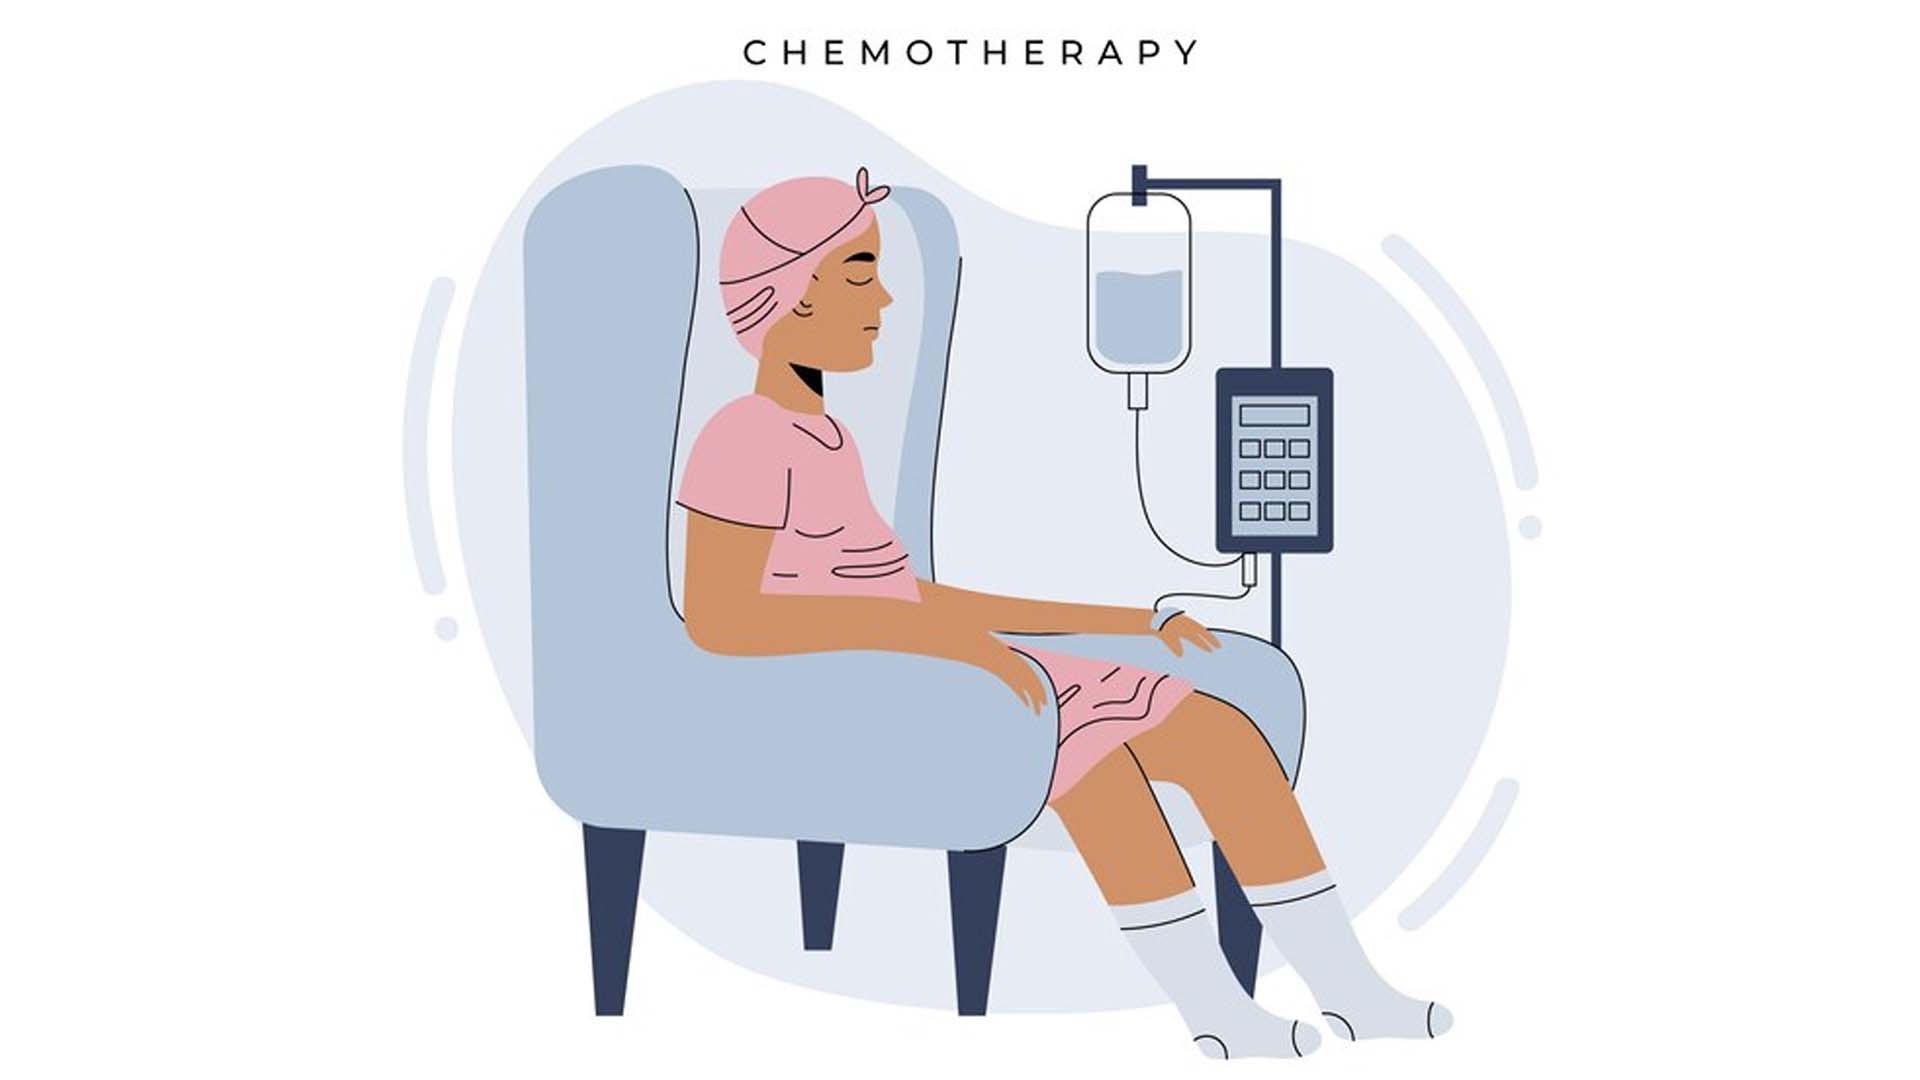 Patient taking Chemotherapy Treatment